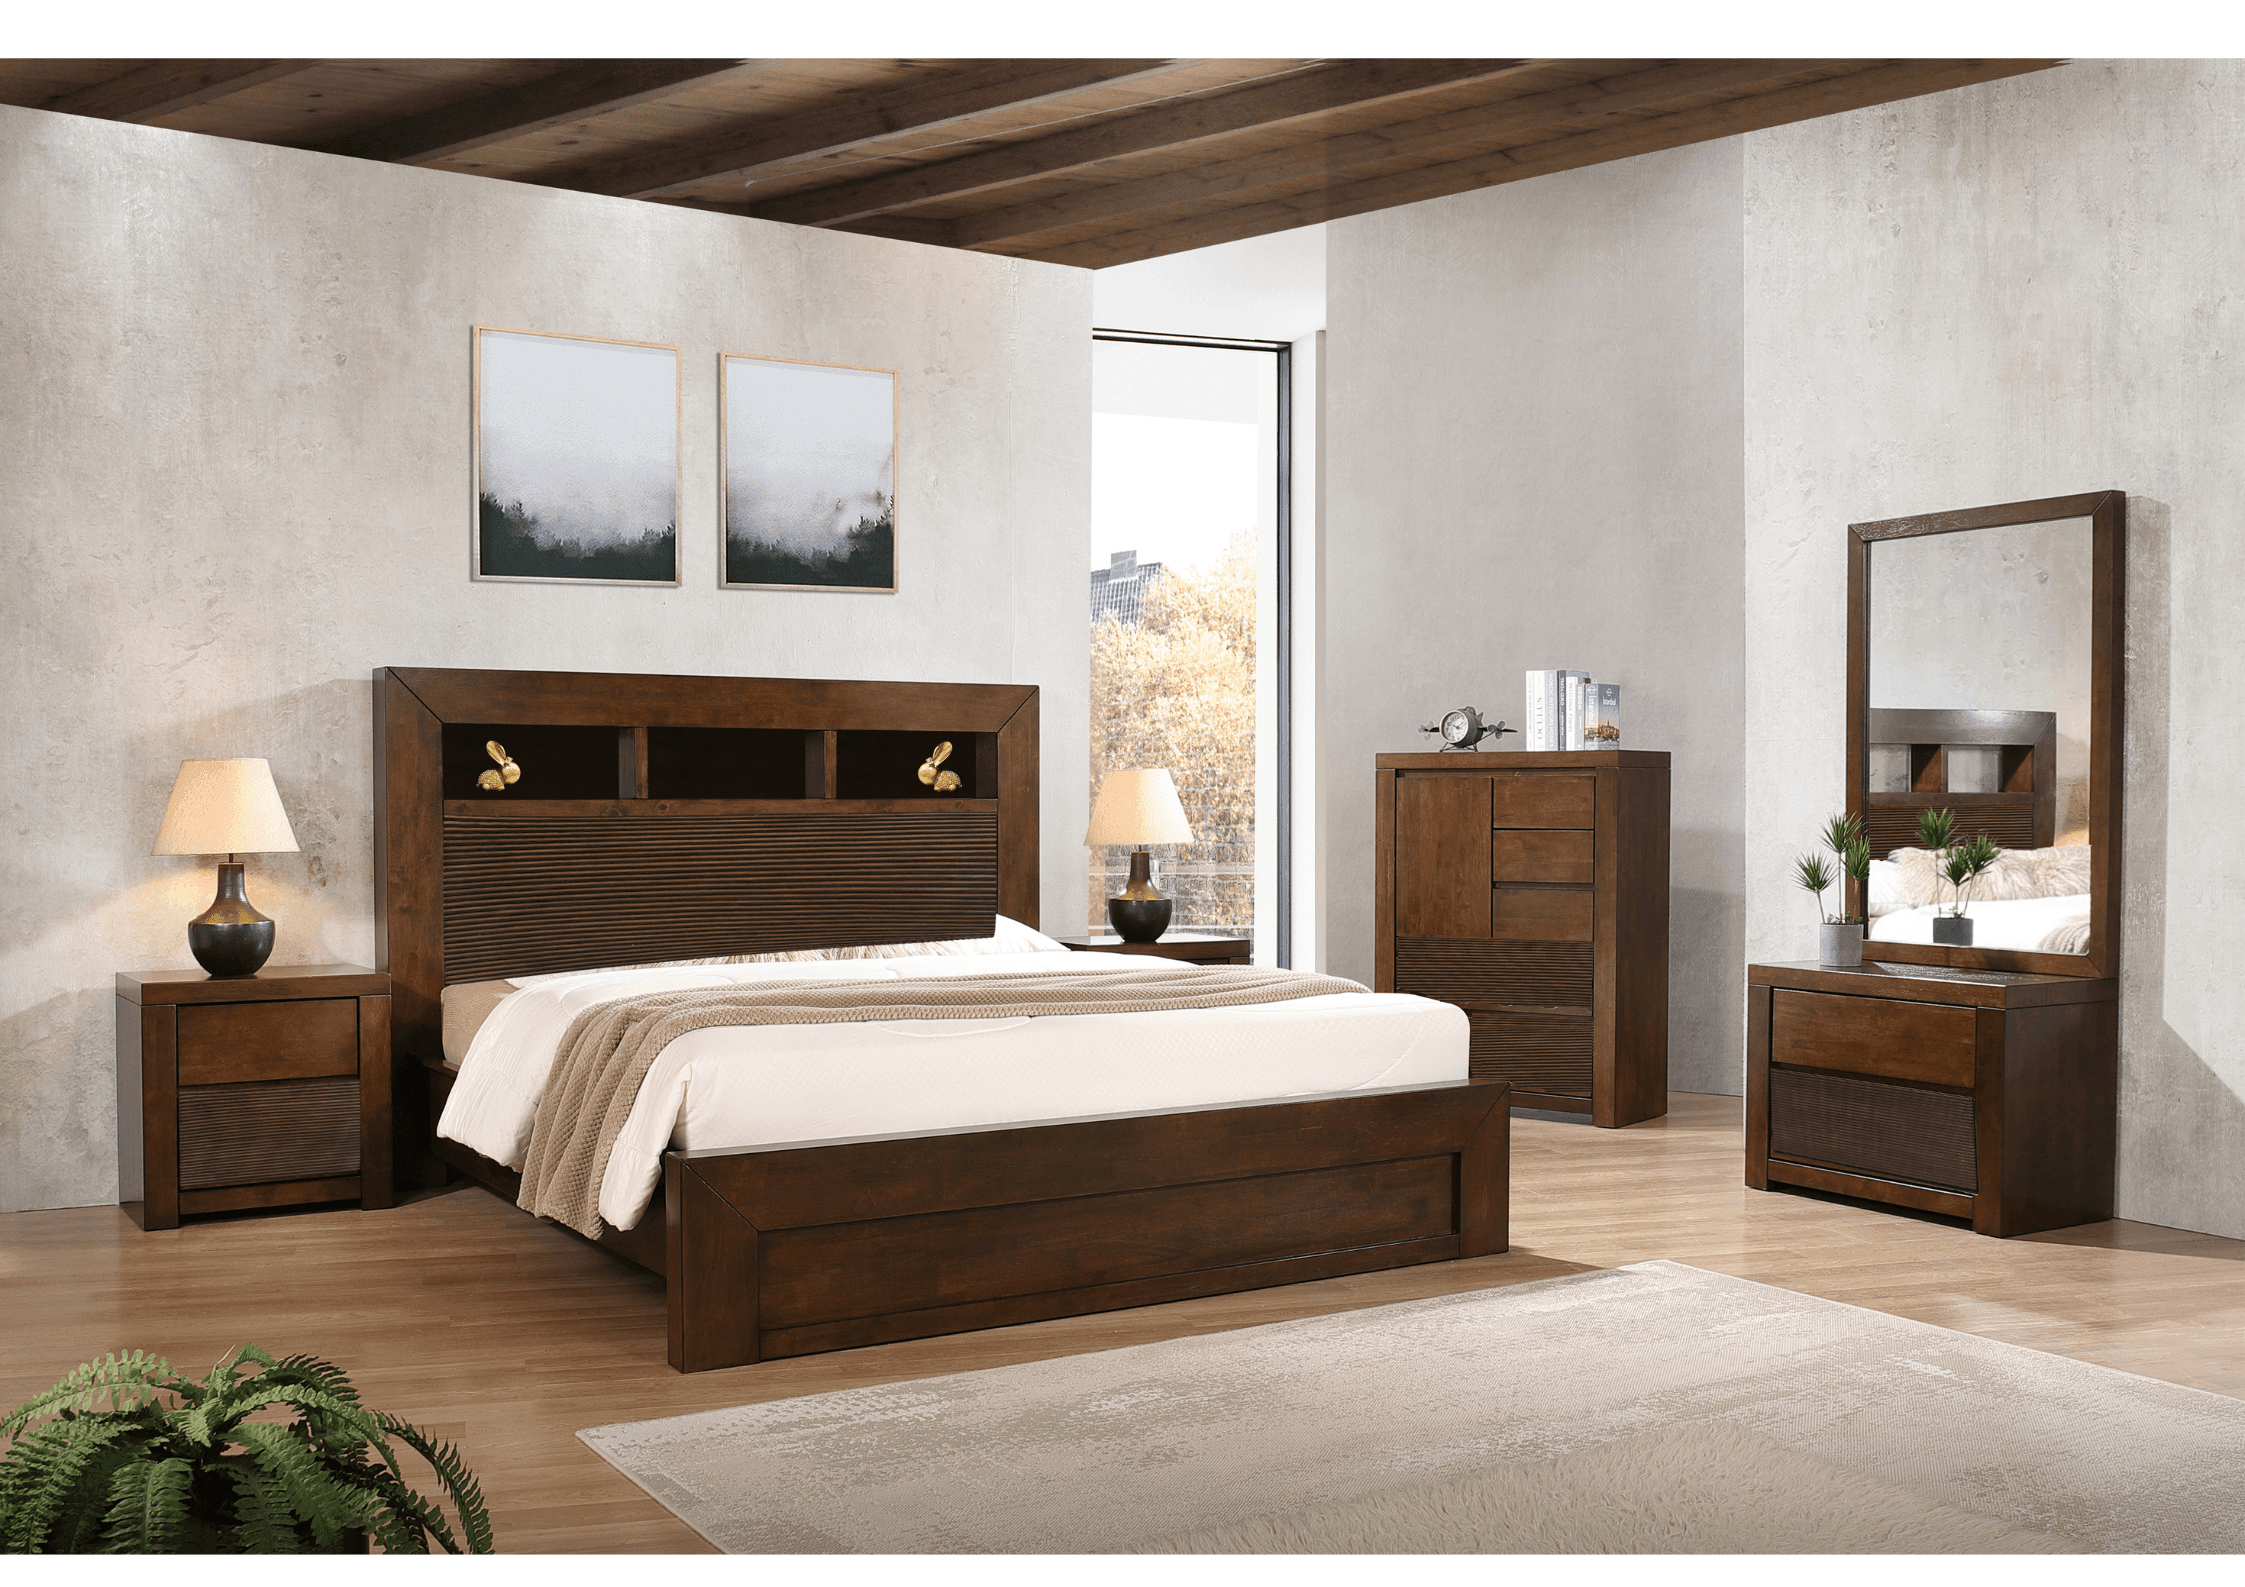 Lisbon Modern Bedroom Suite. Wooden queen size bed frame with bookcase headboard & gas lift storage. Matching dresser with mirror, nightstand & tallboy (not shown) available.